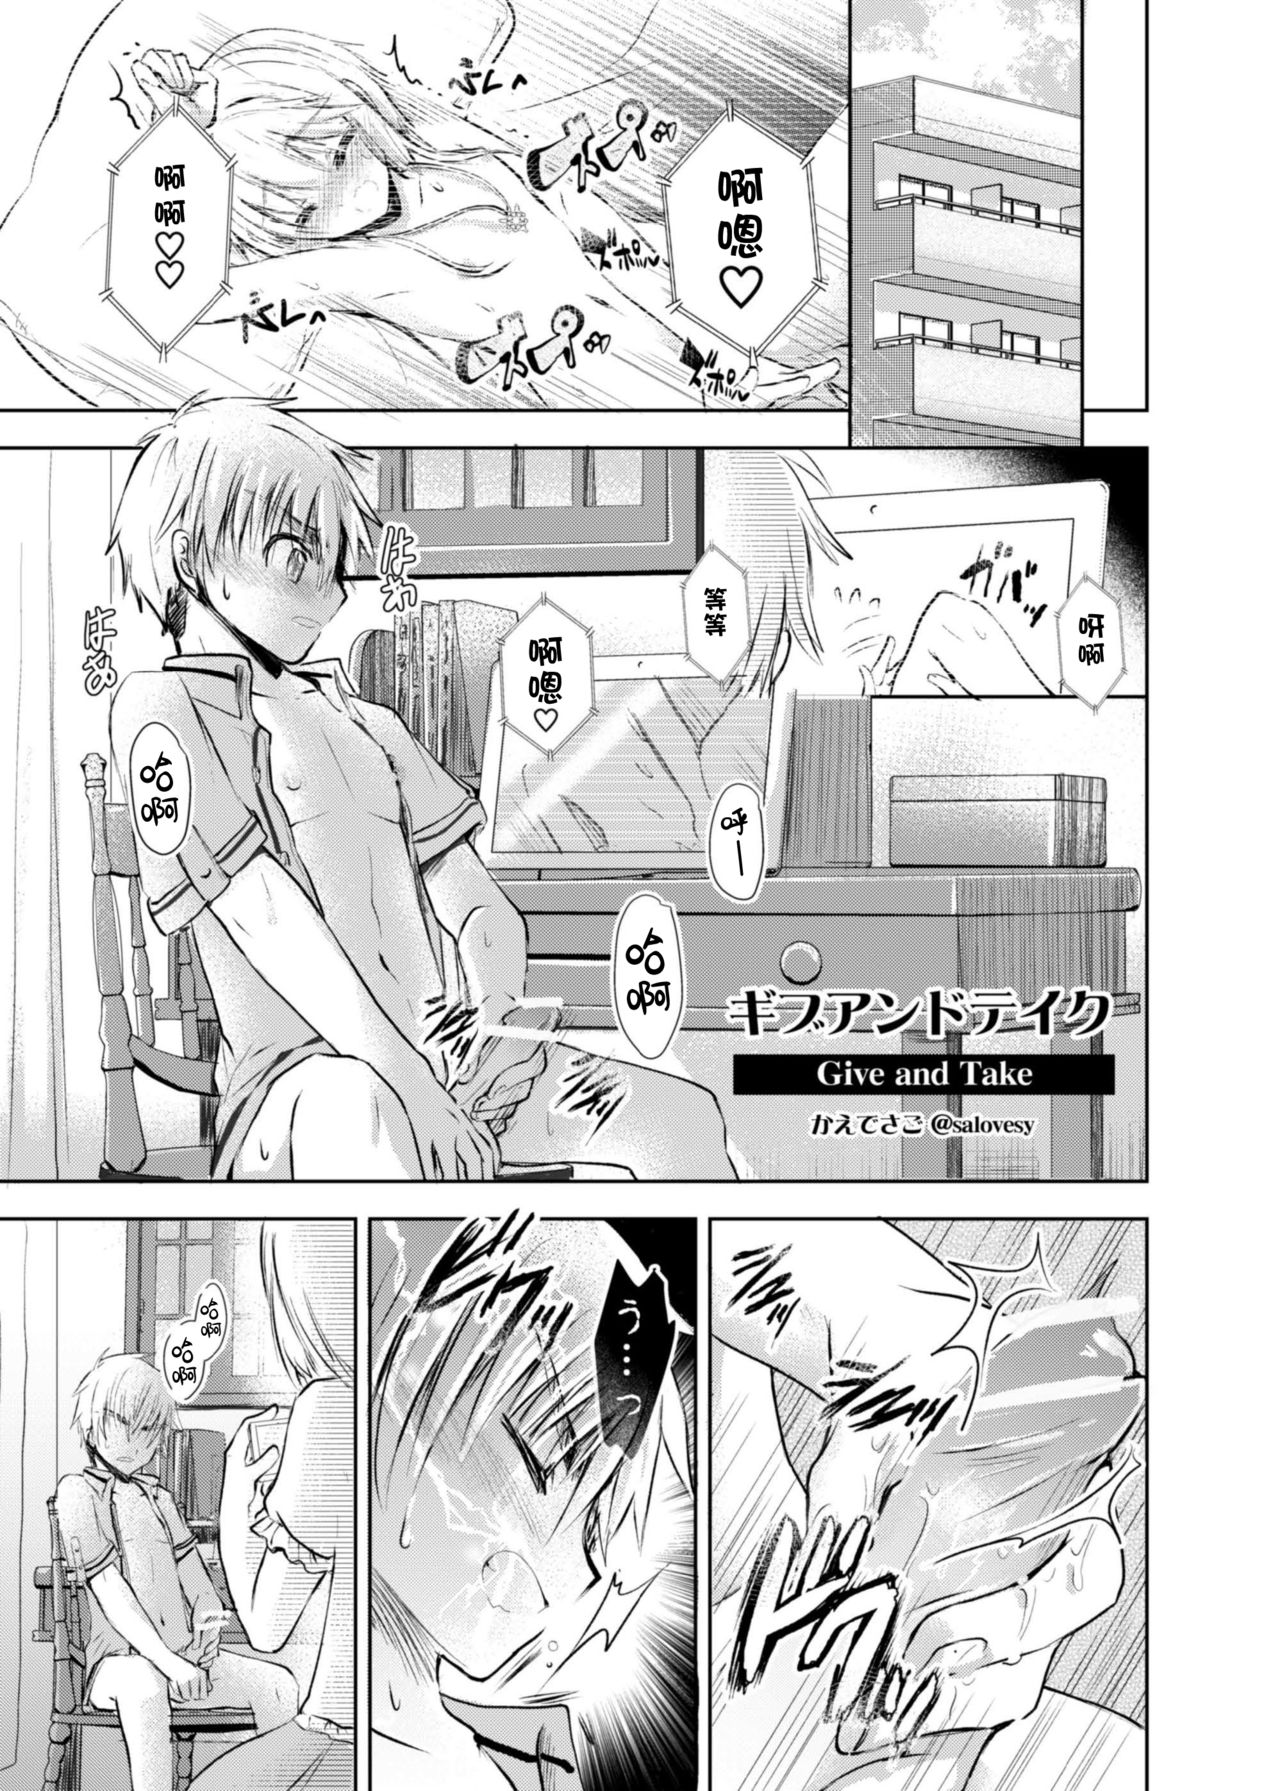 [Maple of Forest (Kaede Sago)] Give and Take (Cardcaptor Sakura) [Chinese] [新桥月白日语社] [Digital] page 14 full